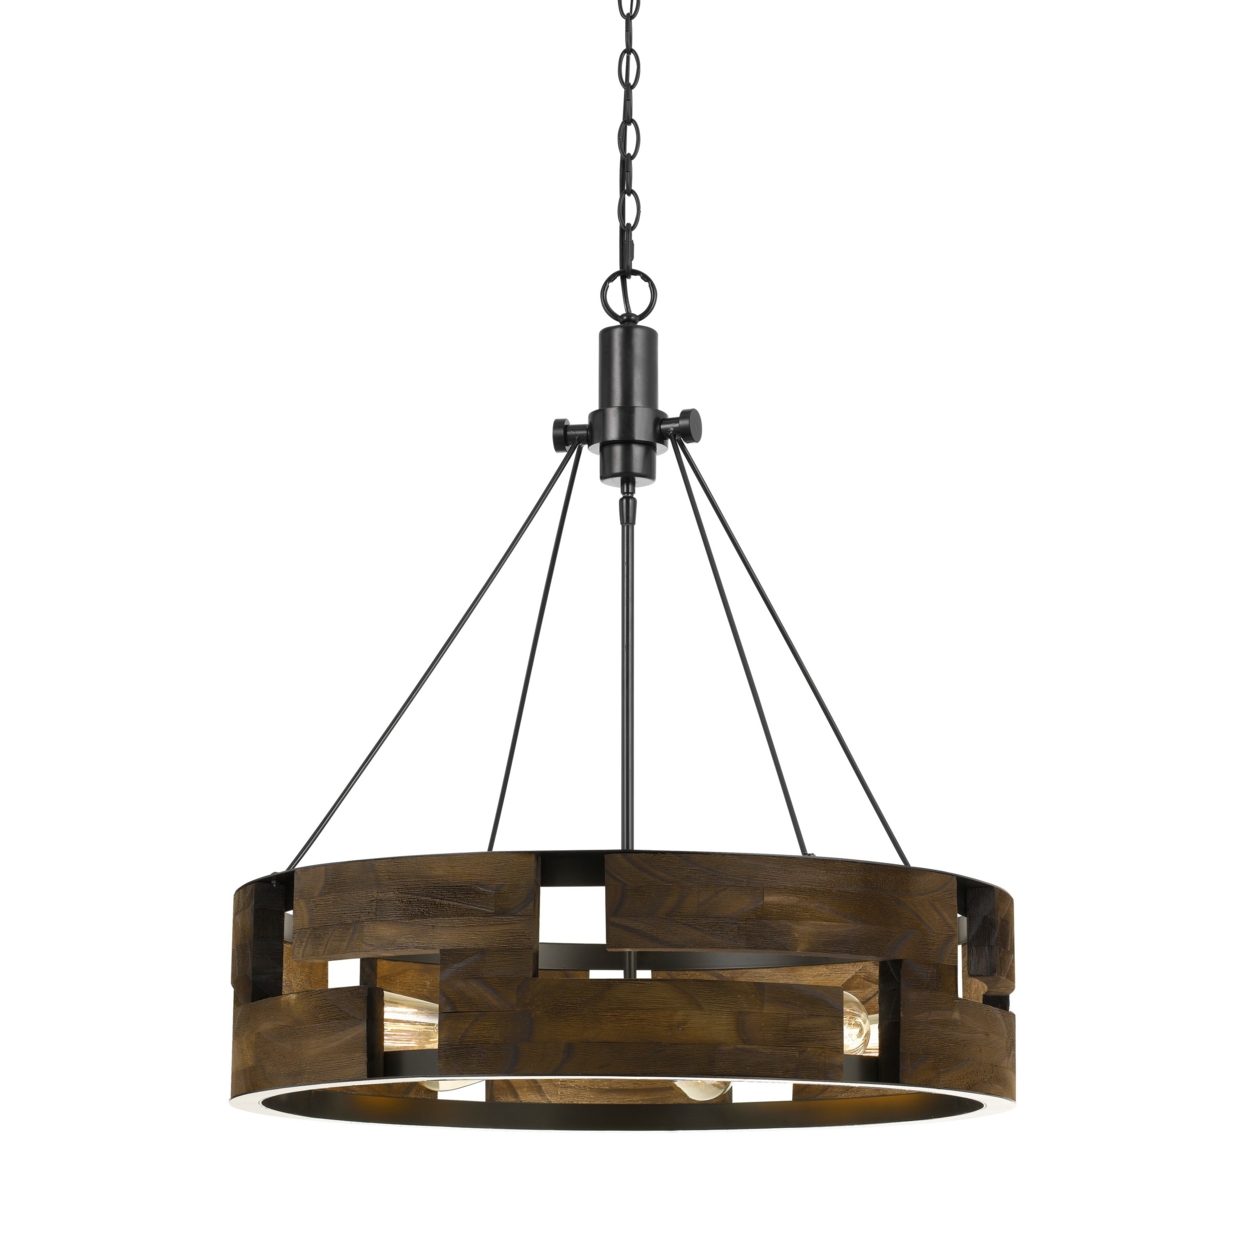 6 Bulb Round Wooden Frame Chandelier With Geometric Cut Our Design, Brown- Saltoro Sherpi